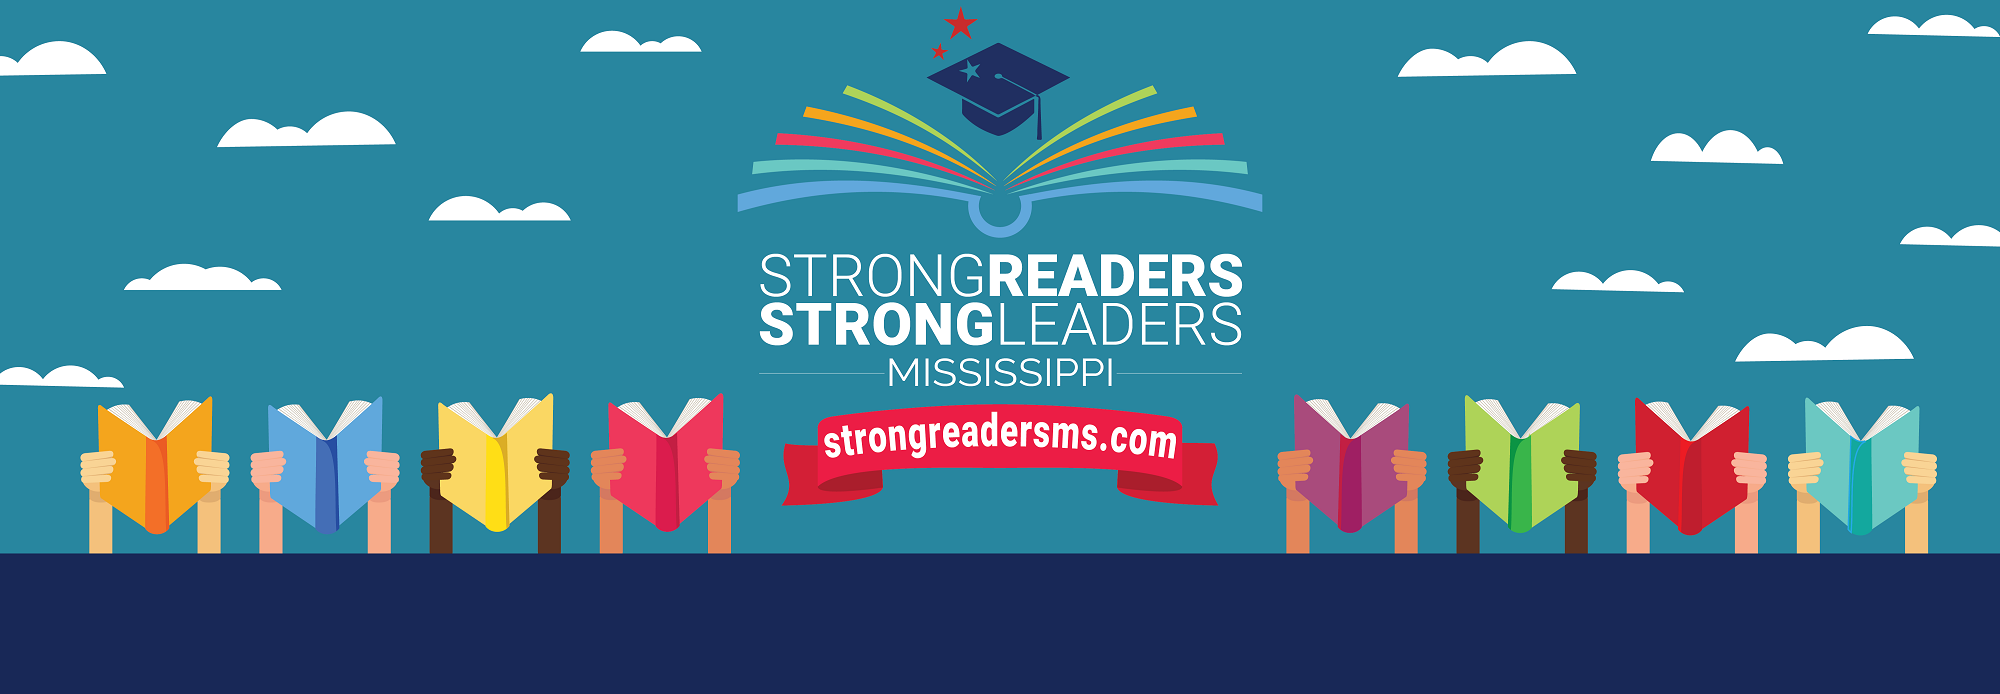 Strong Readers: Website for Families to Help Children Build Reading Skills